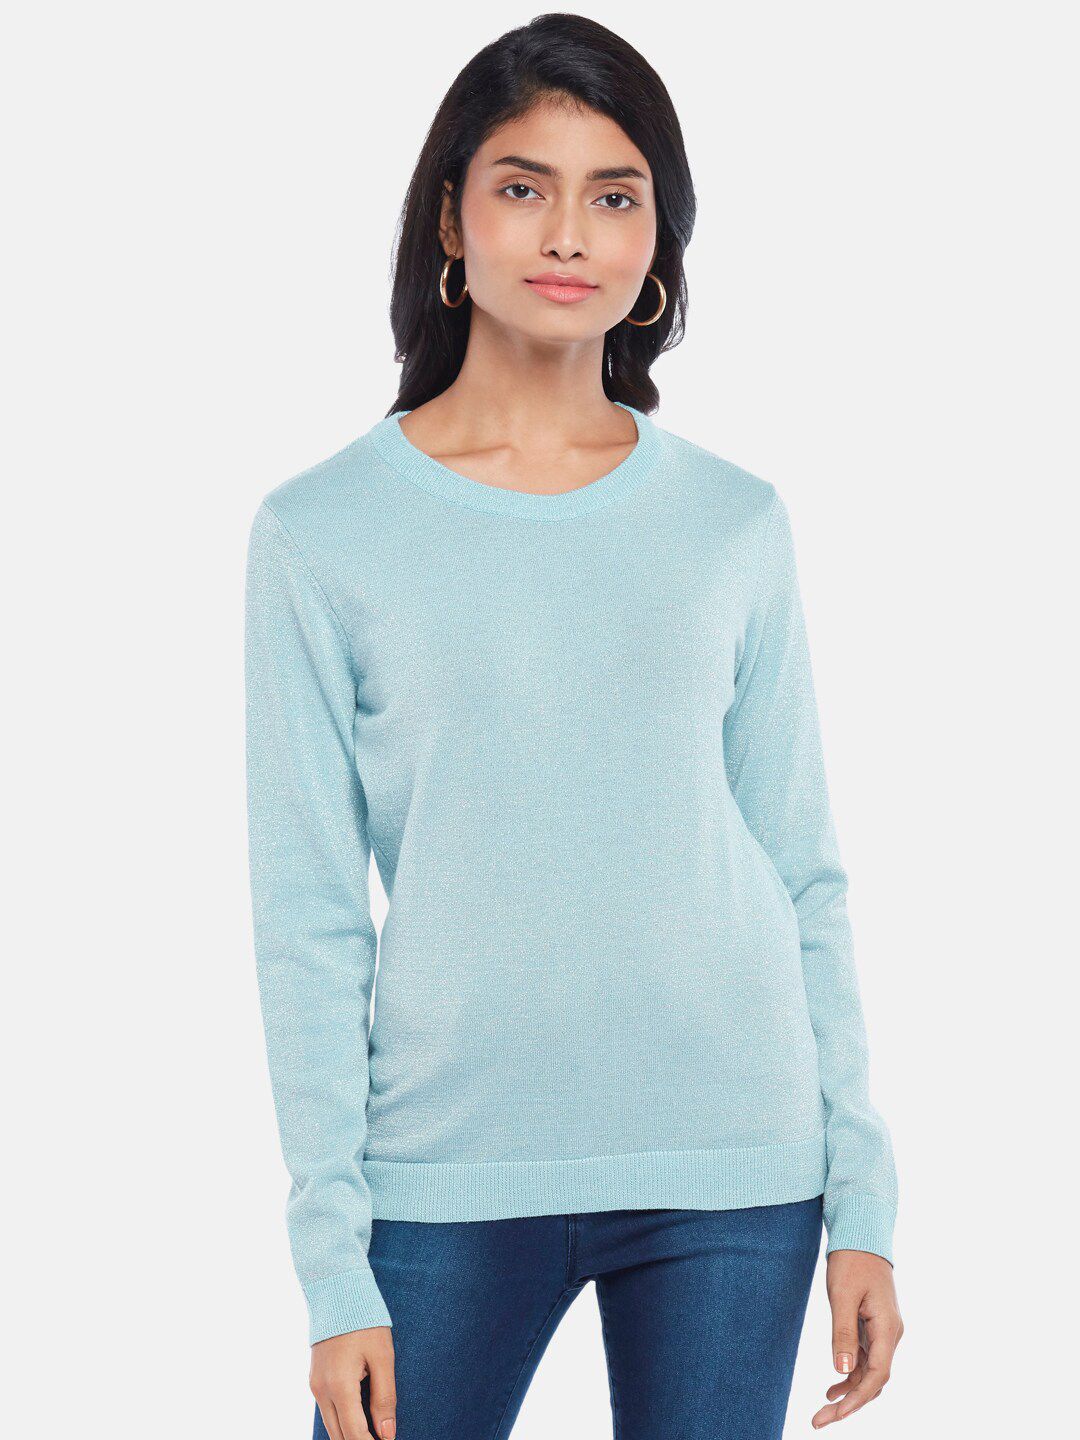 Honey by Pantaloons Women Blue Solid Regular Top Price in India